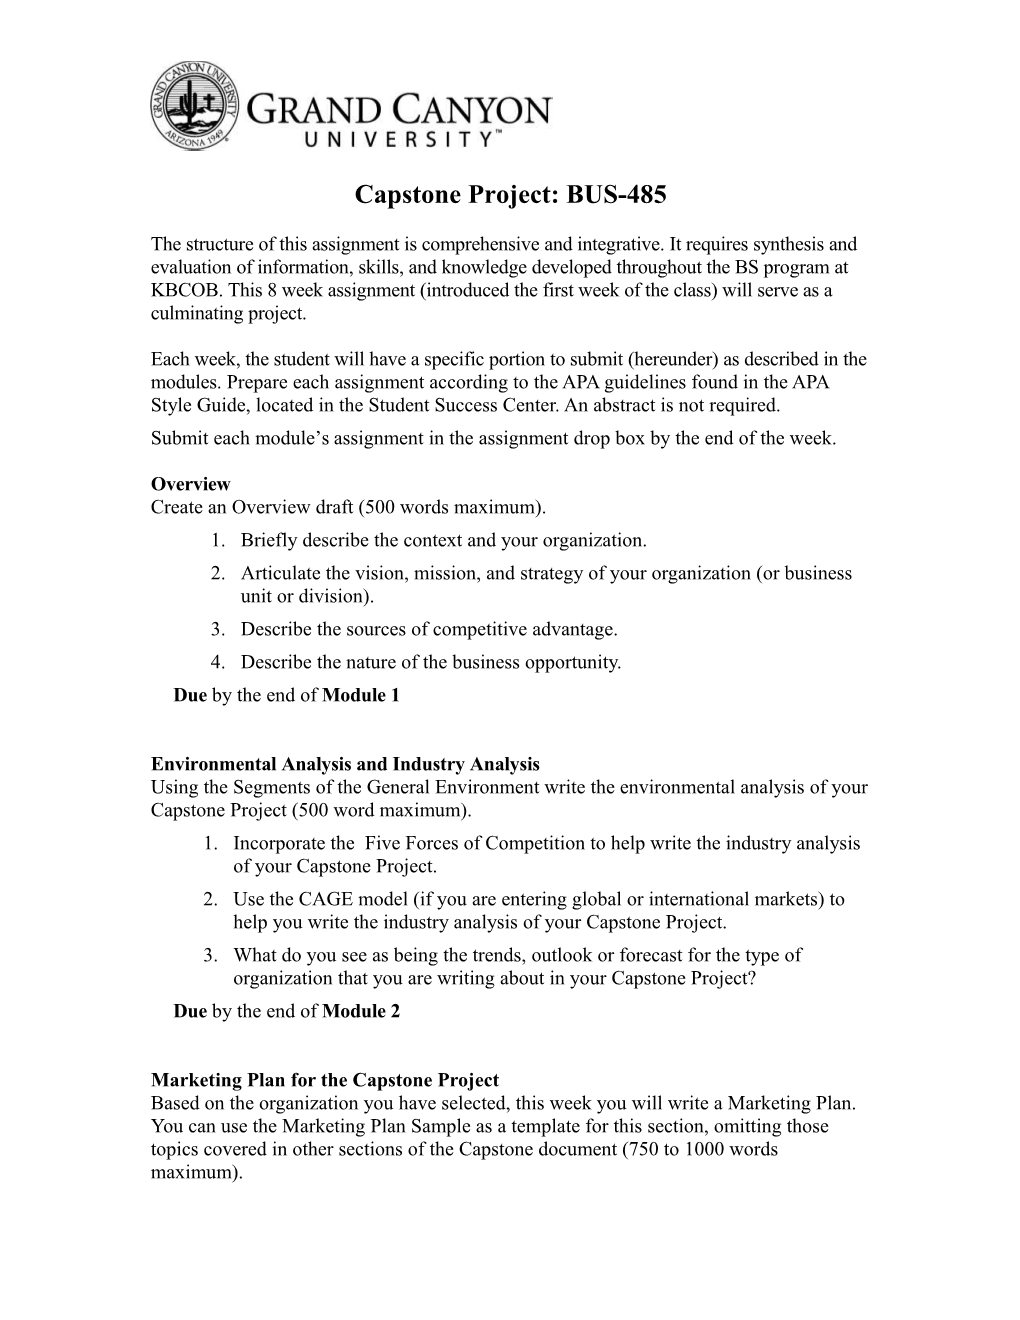 MGT 609: Capstone Projects